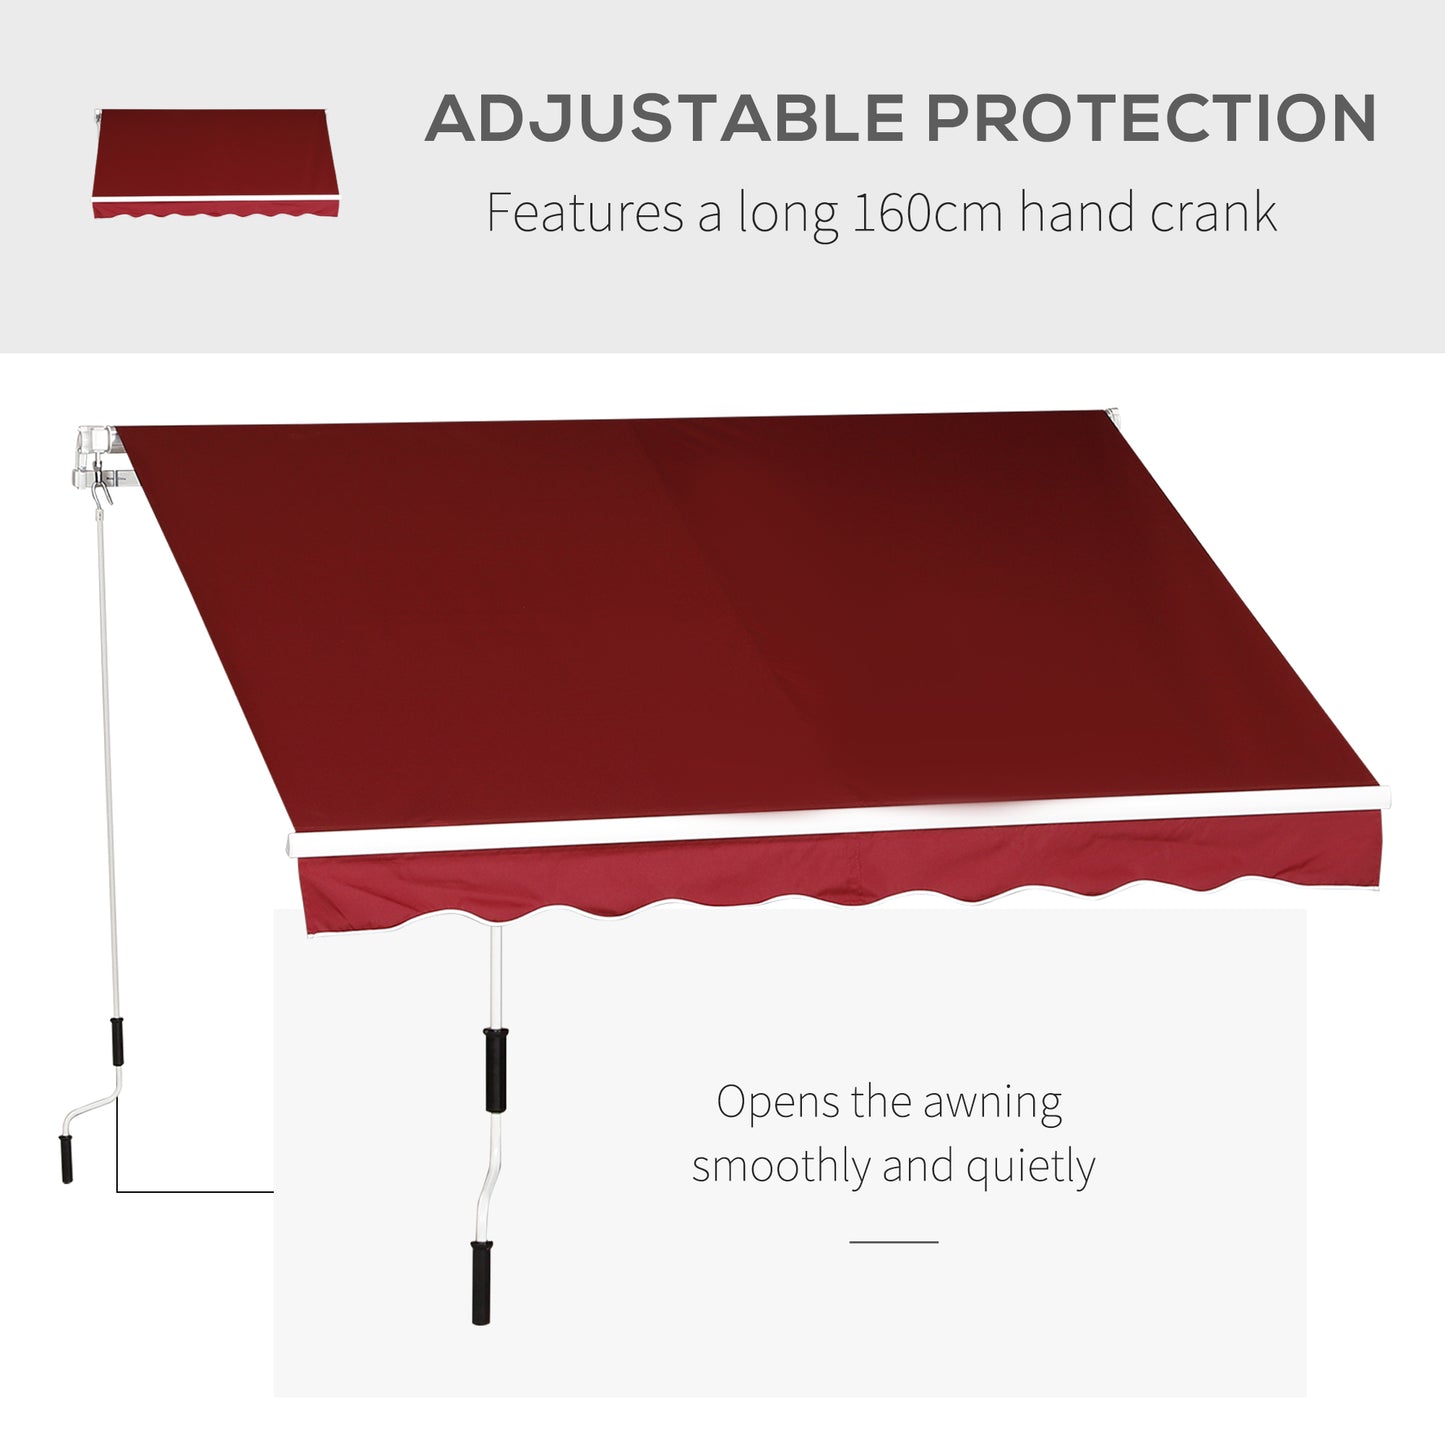 Outsunny Manual Retractable Sun Shade Patio Awning Outdoor Deck Canopy Shelter, 2.5mx2m (Dark Red) Shelter UV Protection,